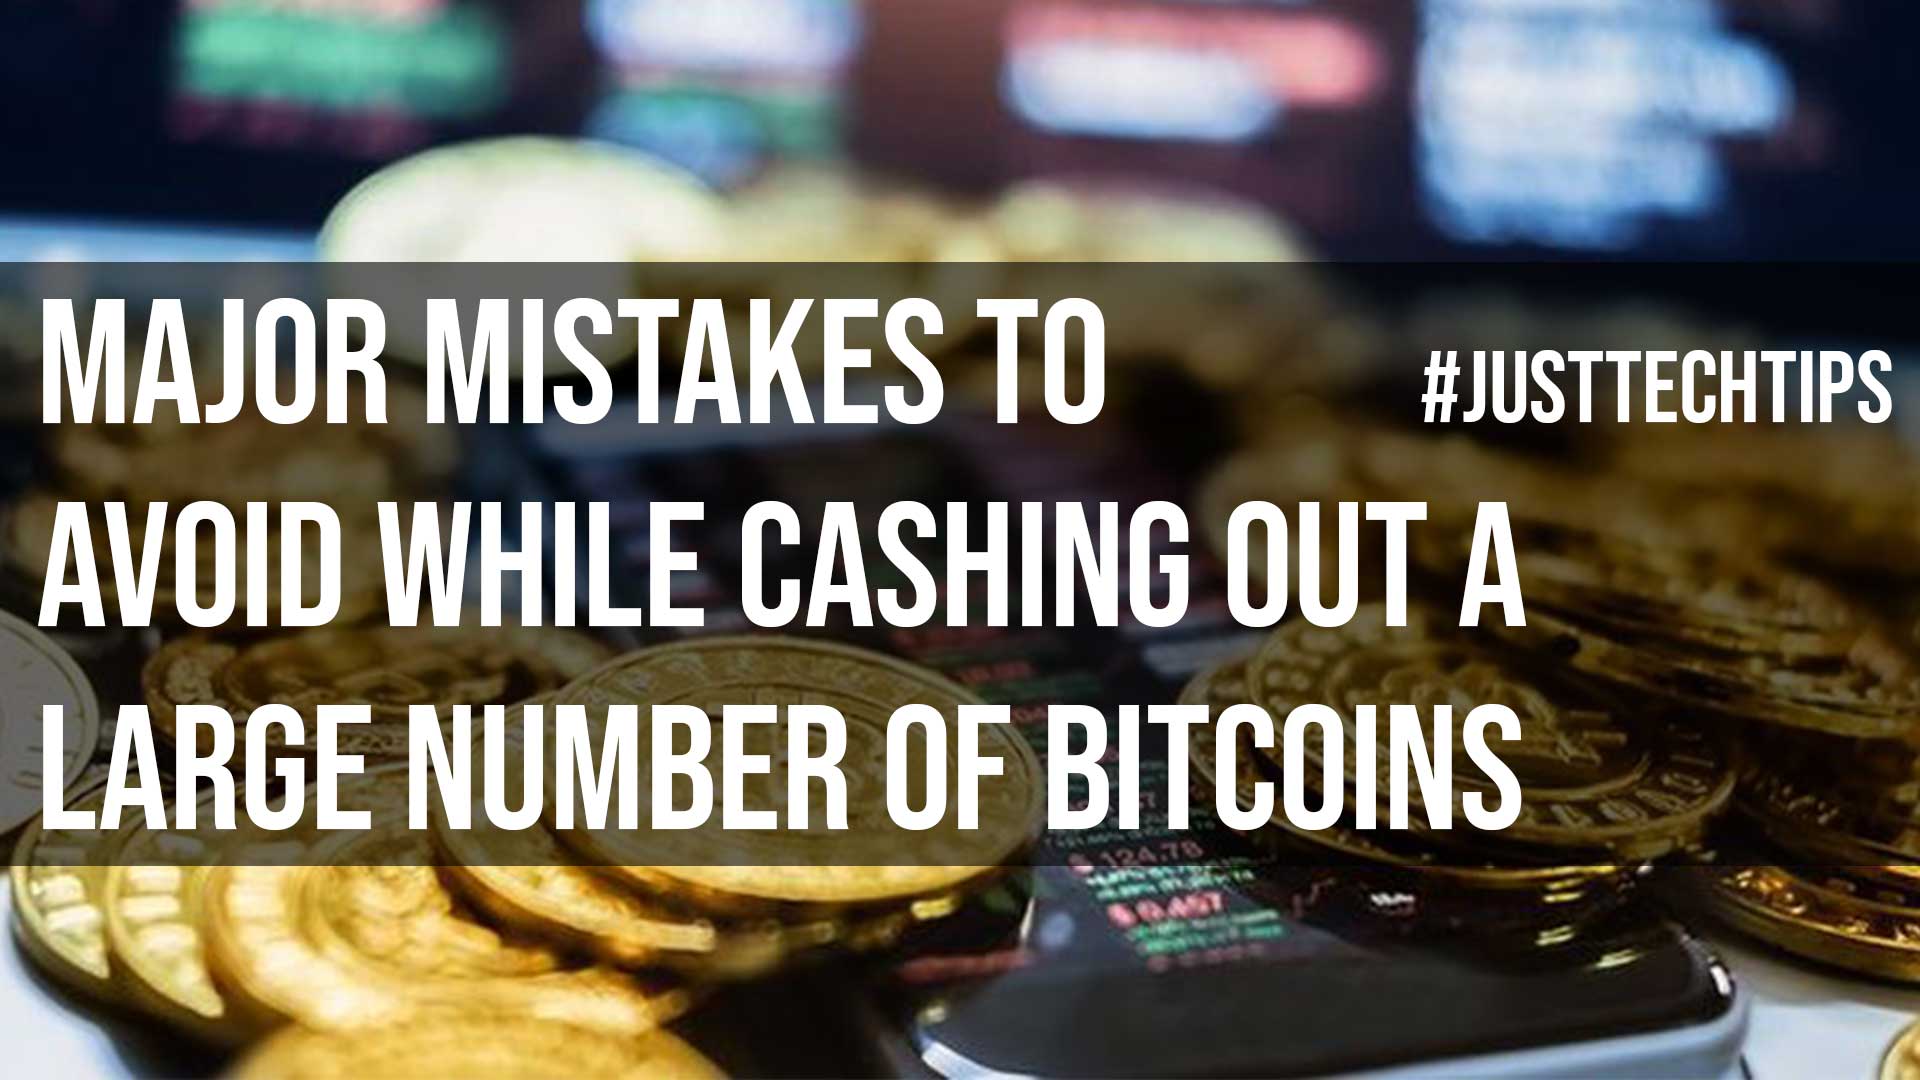 Major Mistakes to Avoid While Cashing Out a Large Number of Bitcoins